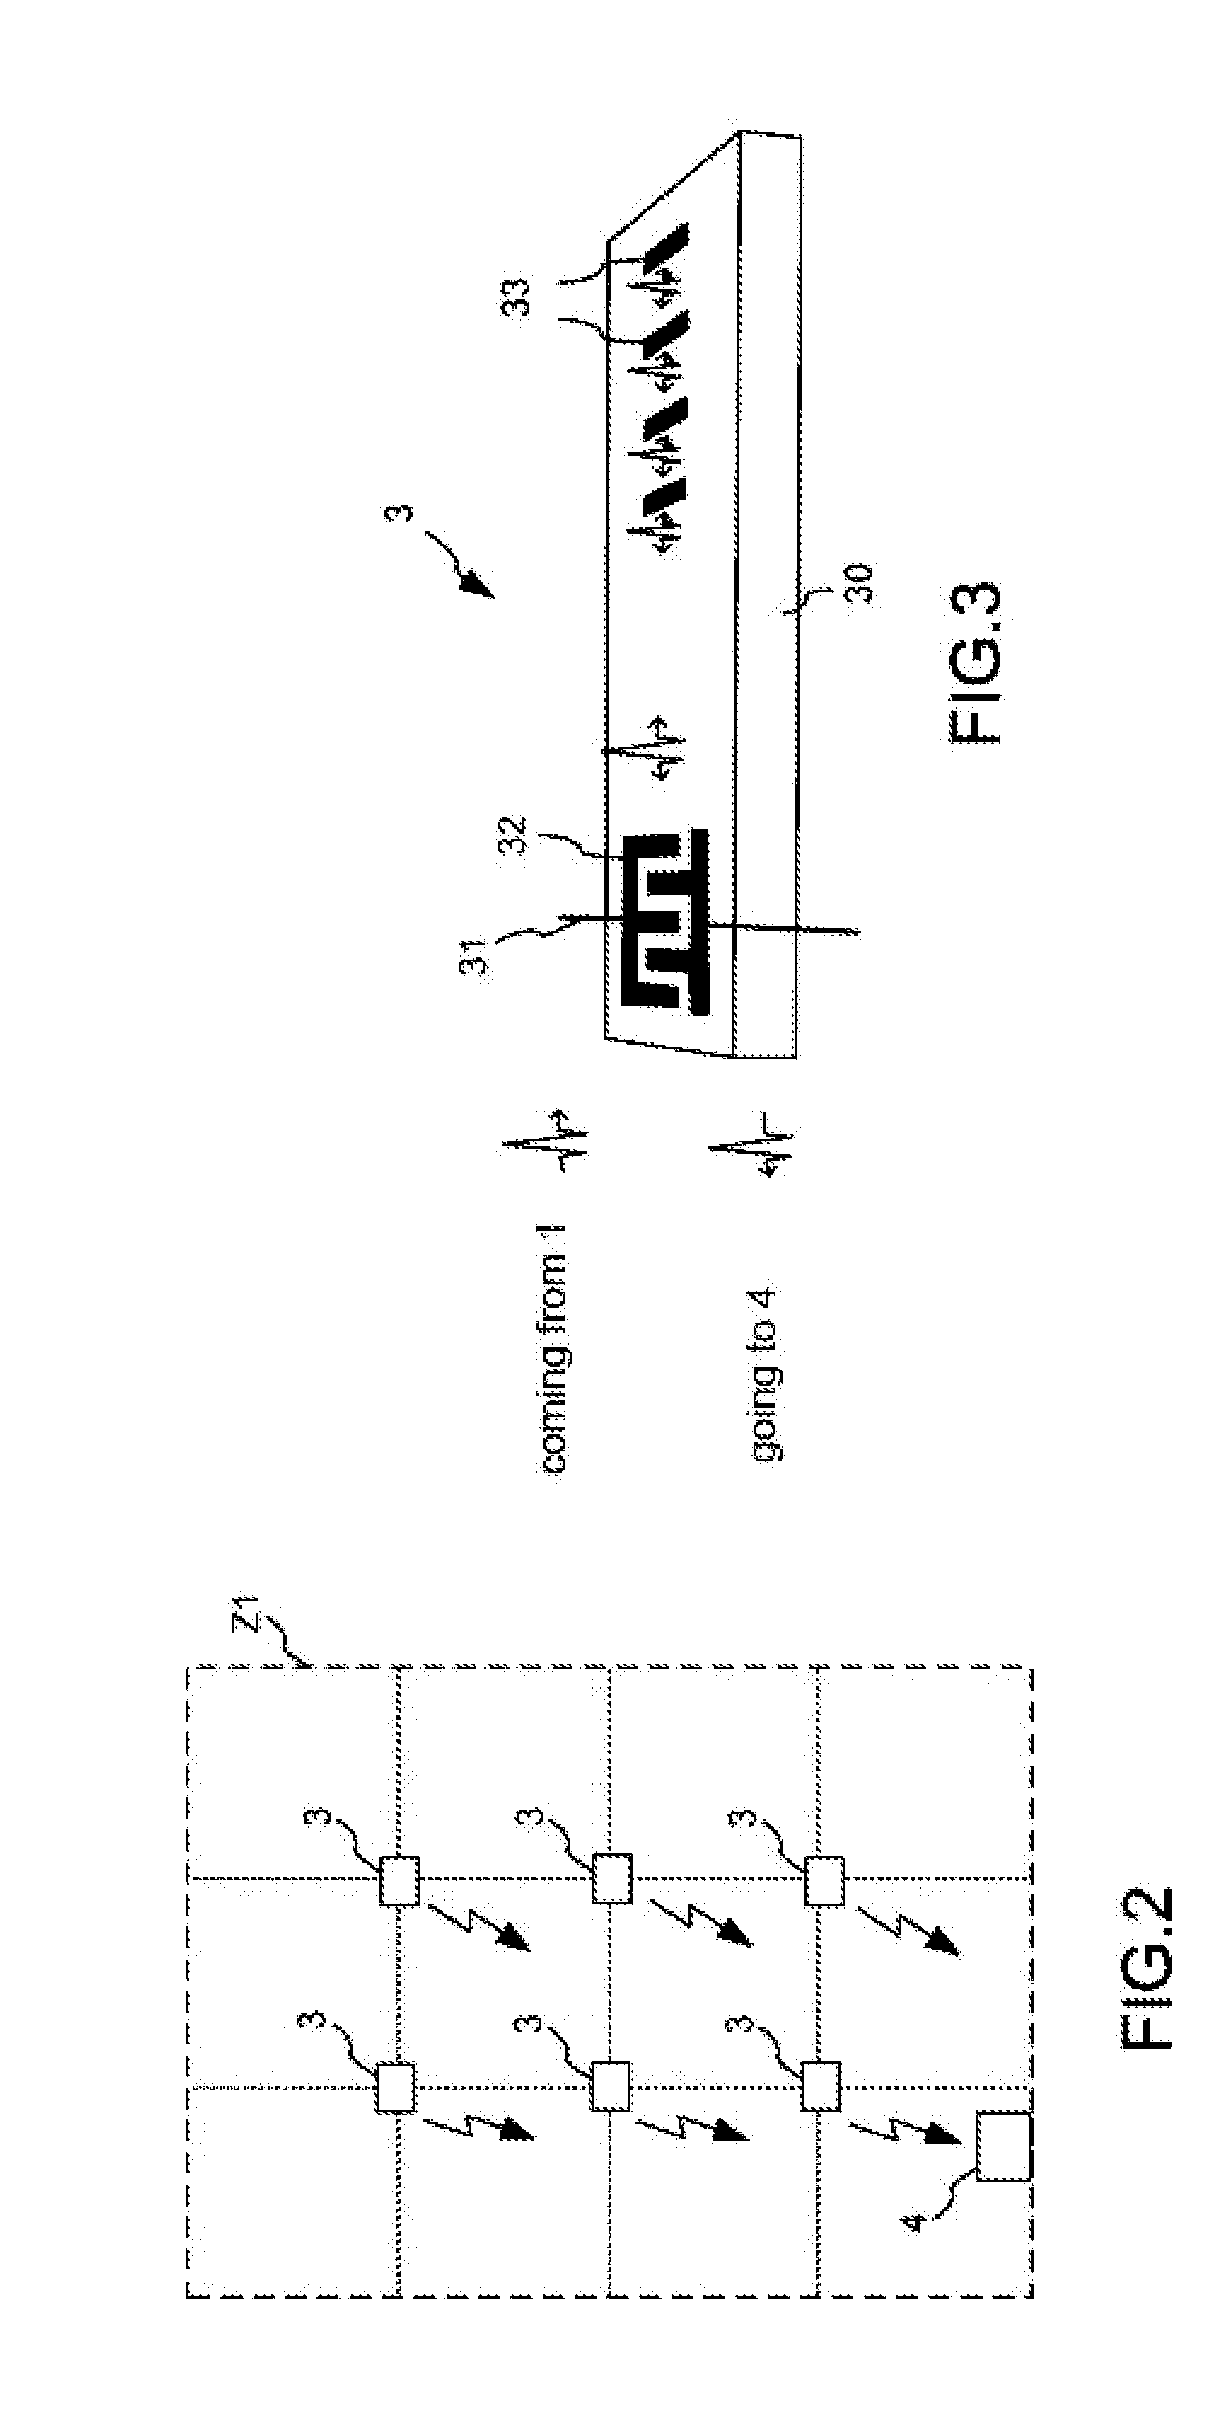 System forTransmission of Signals in a Domestic Environment